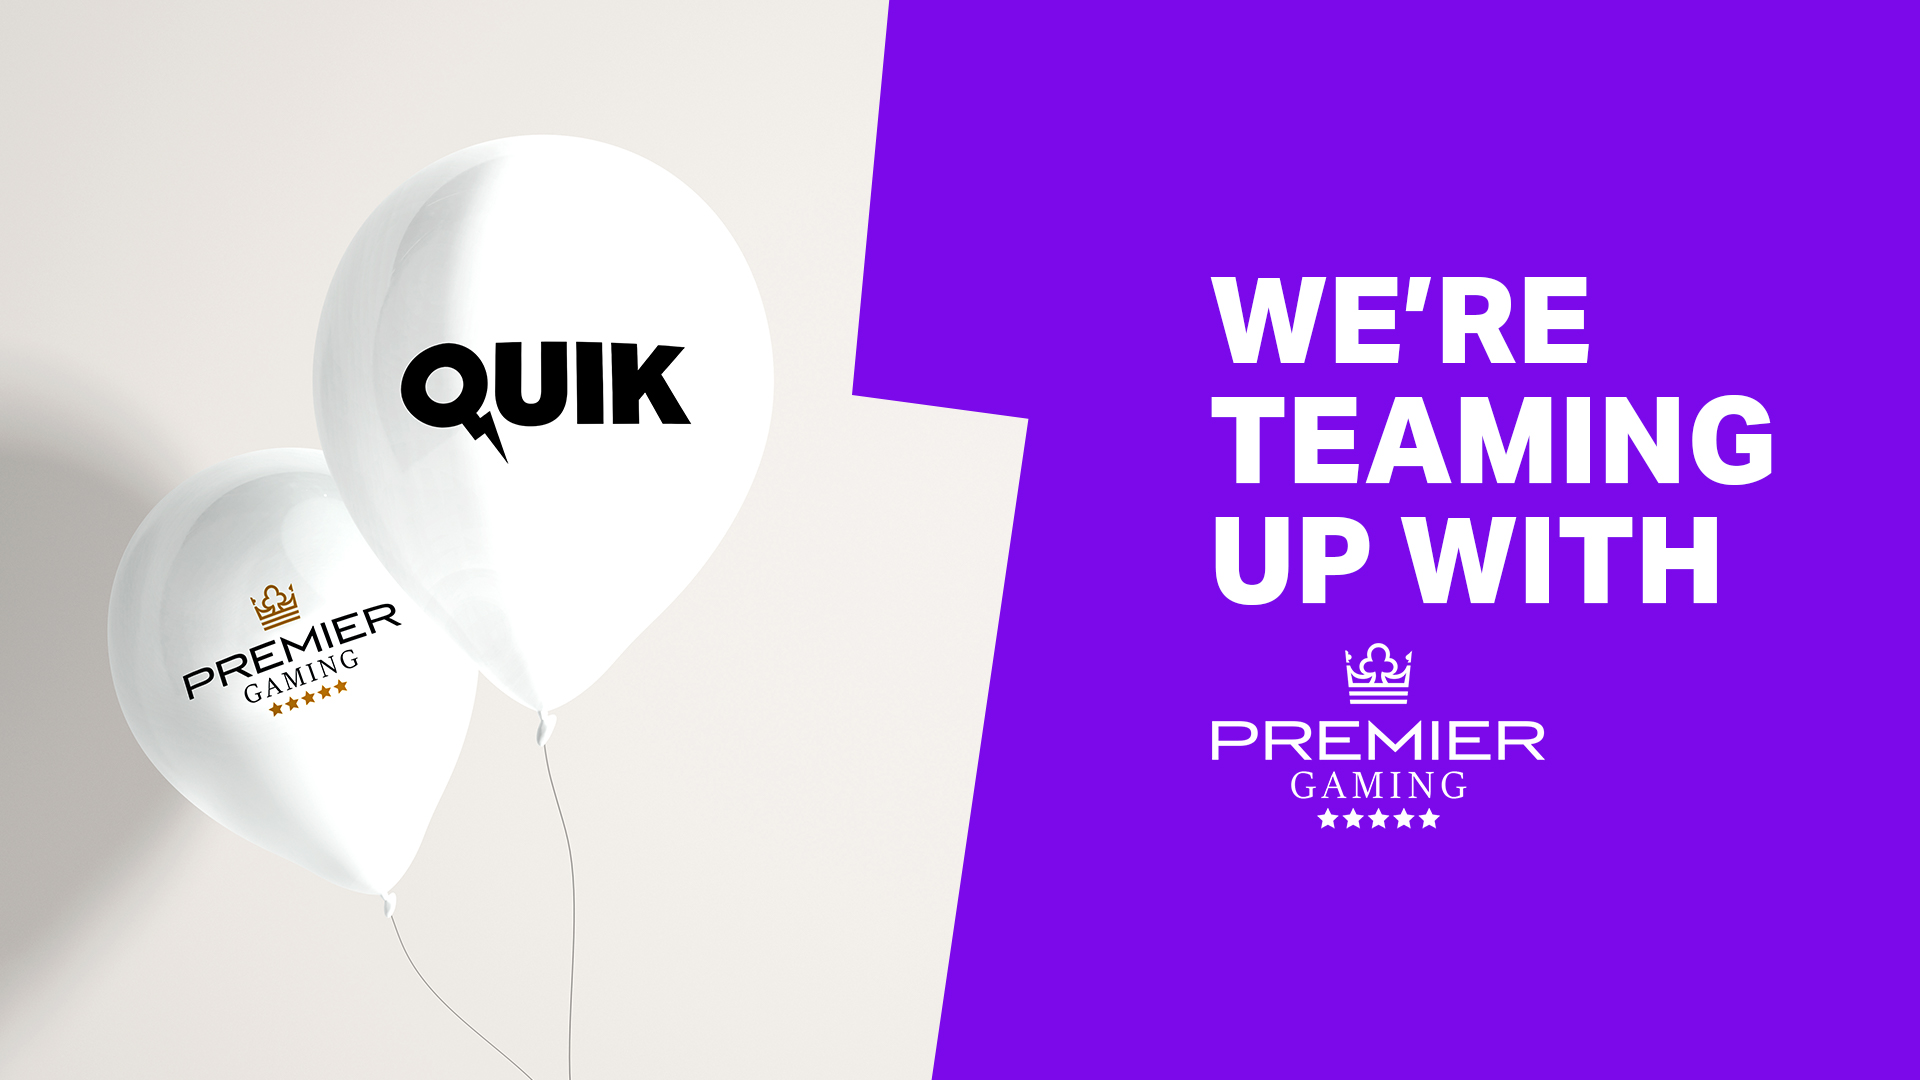 Quik seals agreement with Premier Gaming